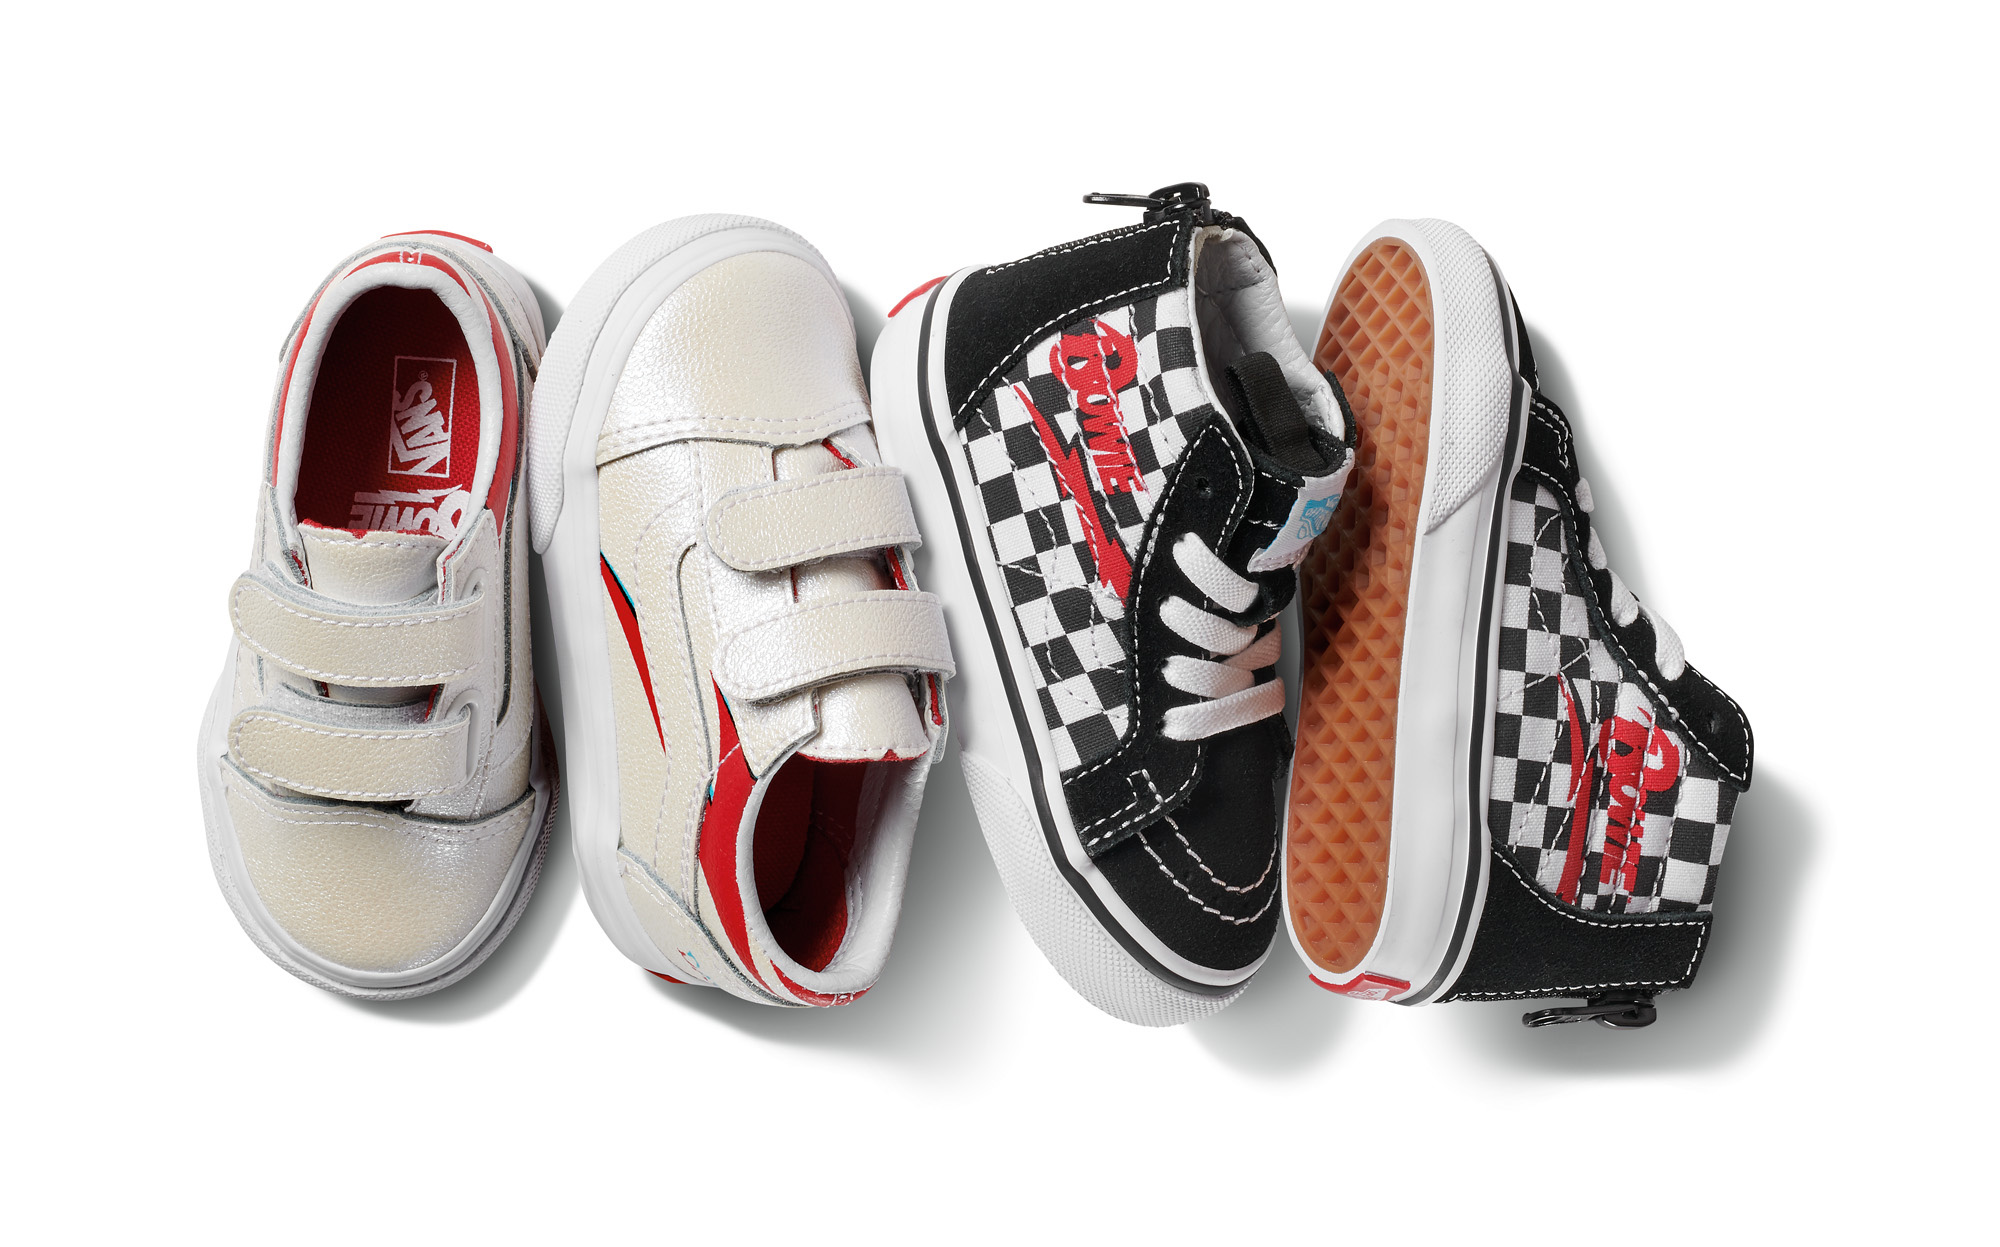 Vans releases David Bowie-inspired collection - CNN Style صائد الاحلام